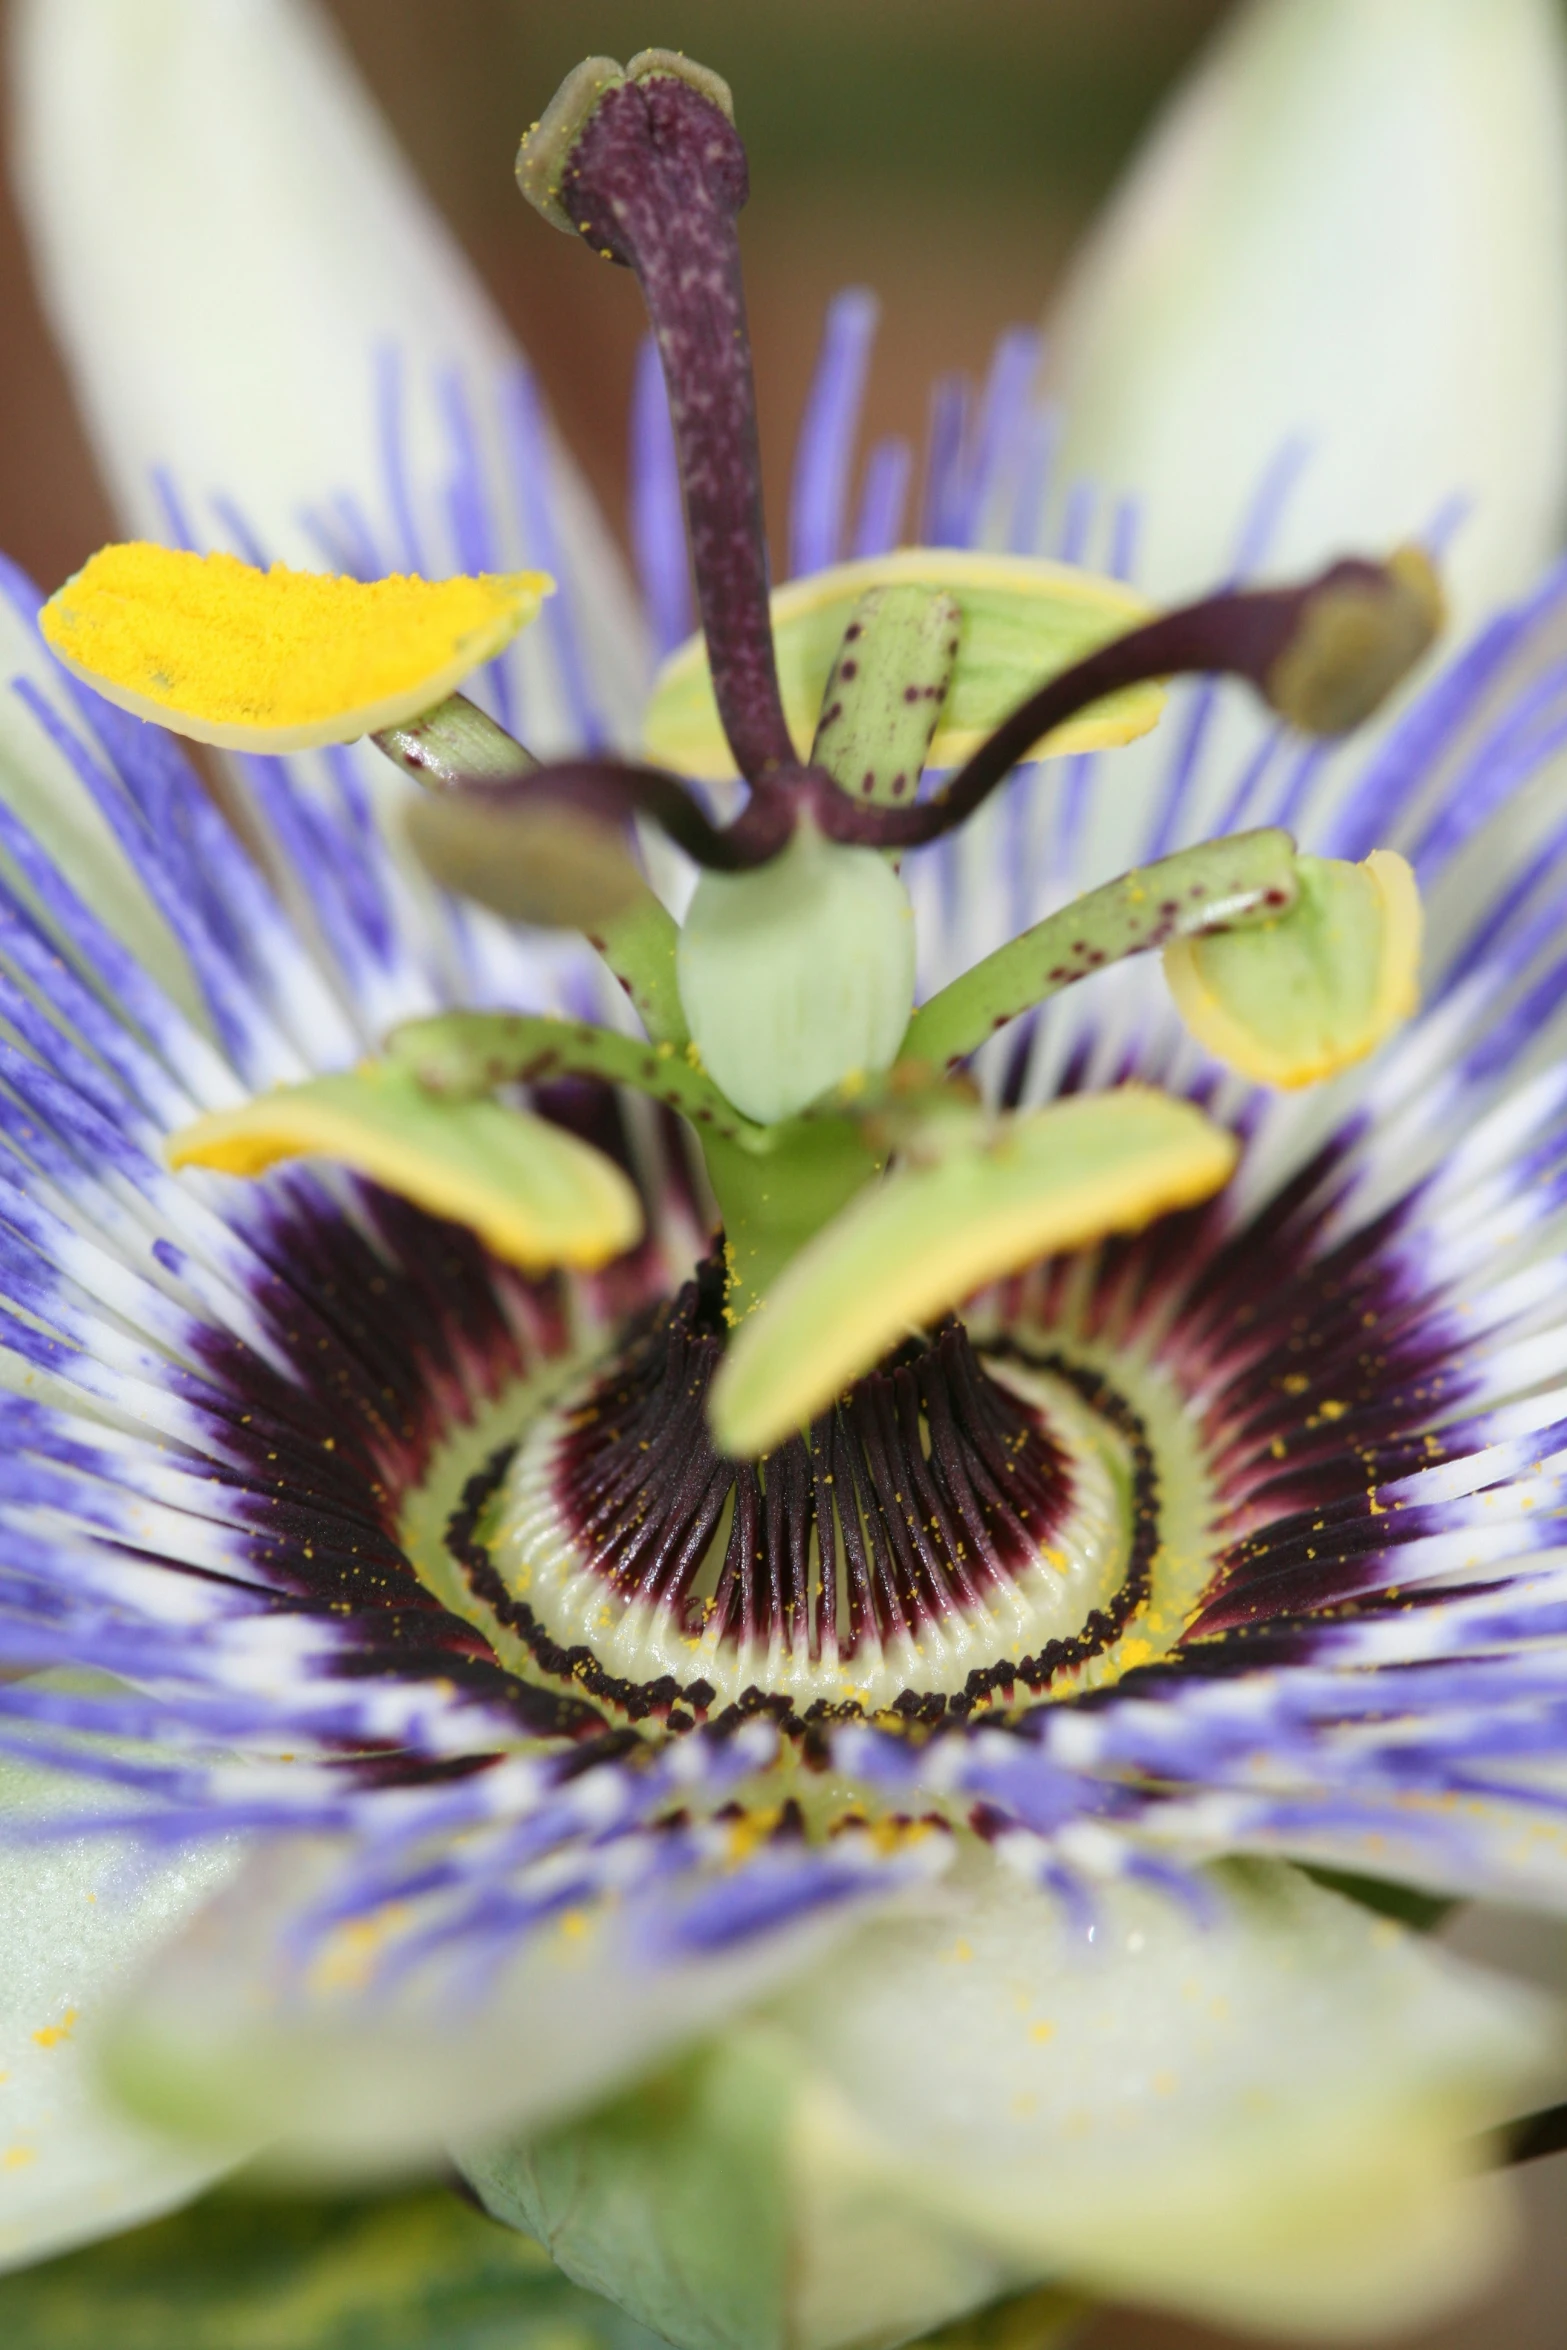 an unusual looking flower with purple petals on a dark blue background